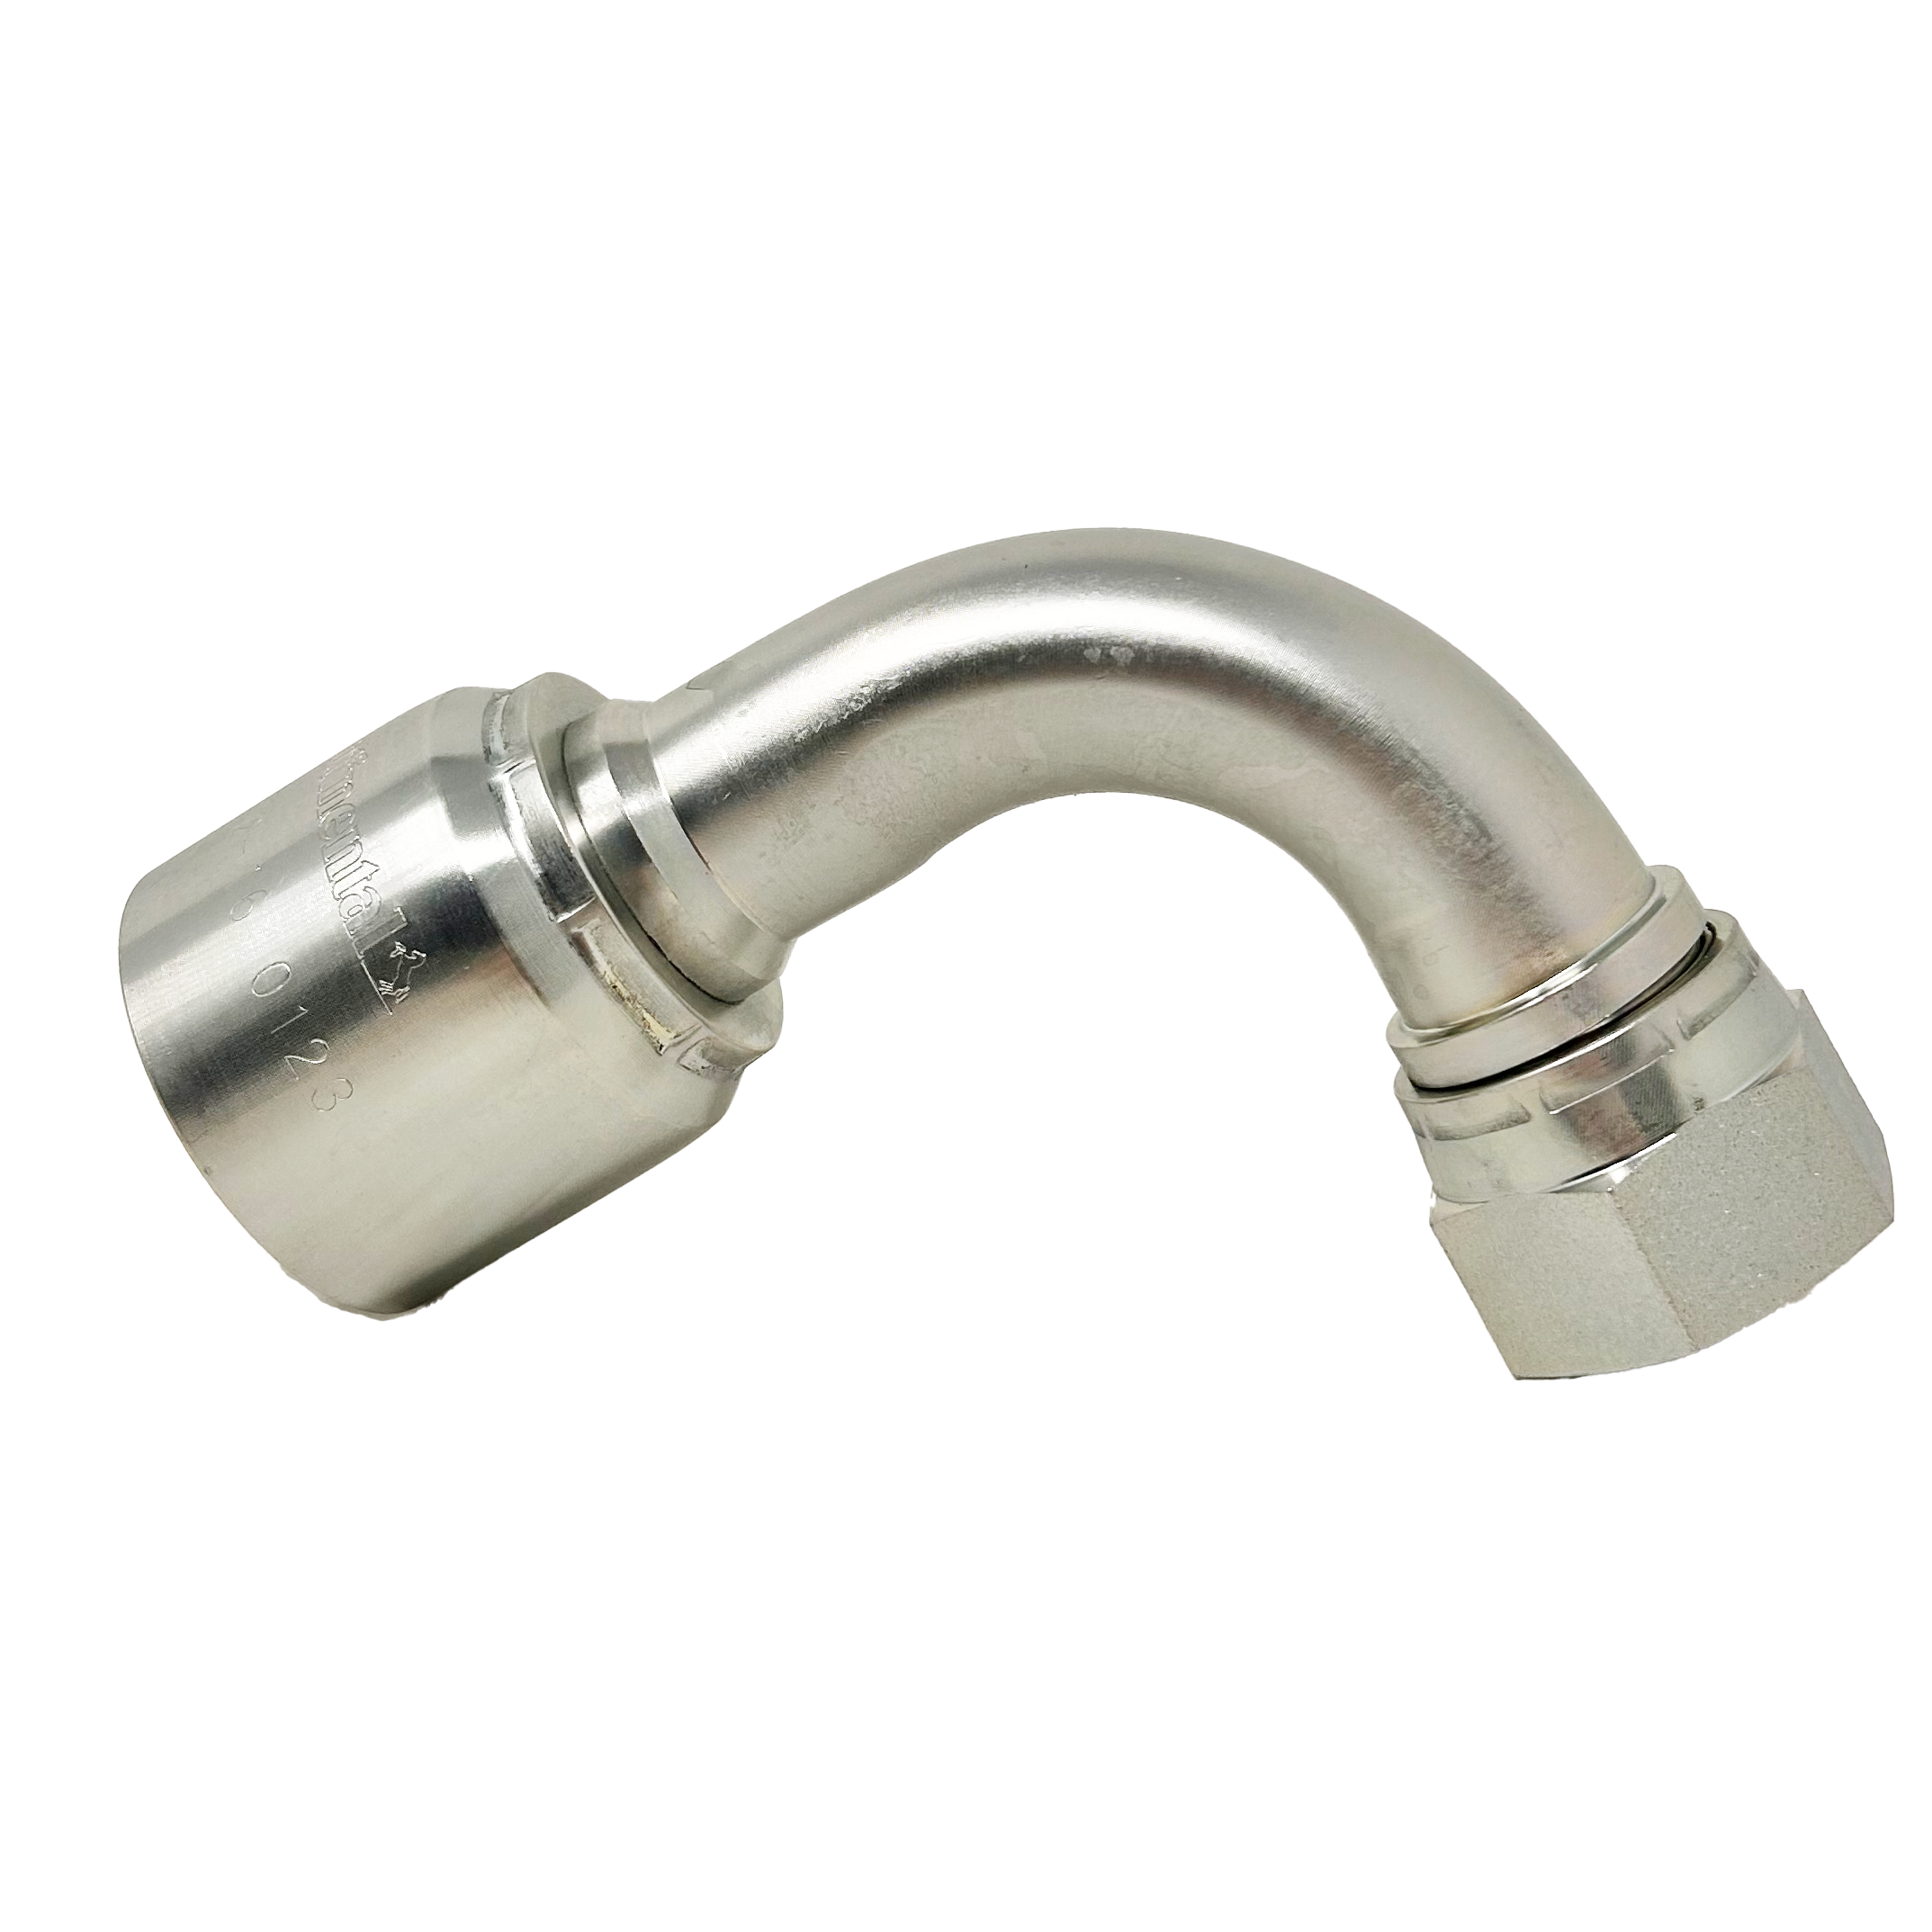 B2-JCFX90-1616S: Continental Hose Fitting, 1" Hose ID x 1-5/16-12 Female JIC, 90-Degree Swivel Connection